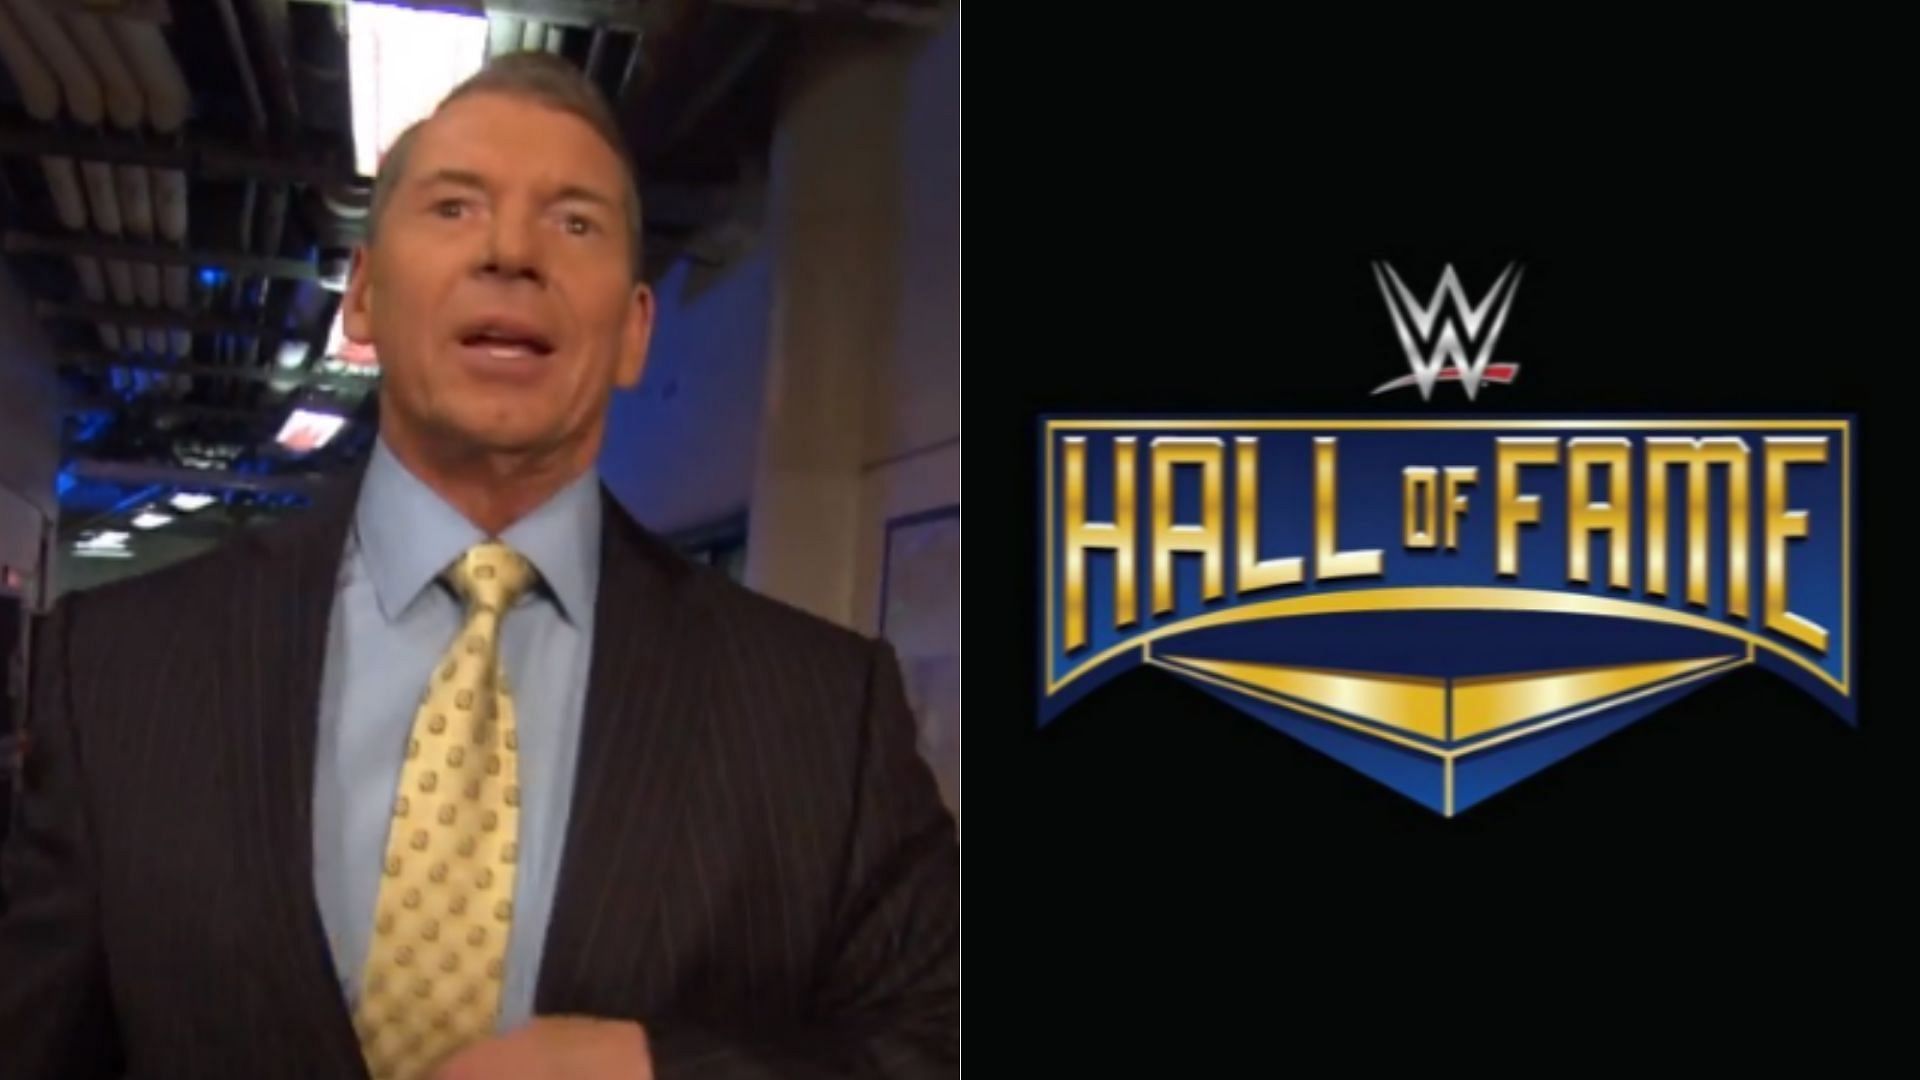 WWE Chairman Vince McMahon has the final say on Hall of Fame inductees